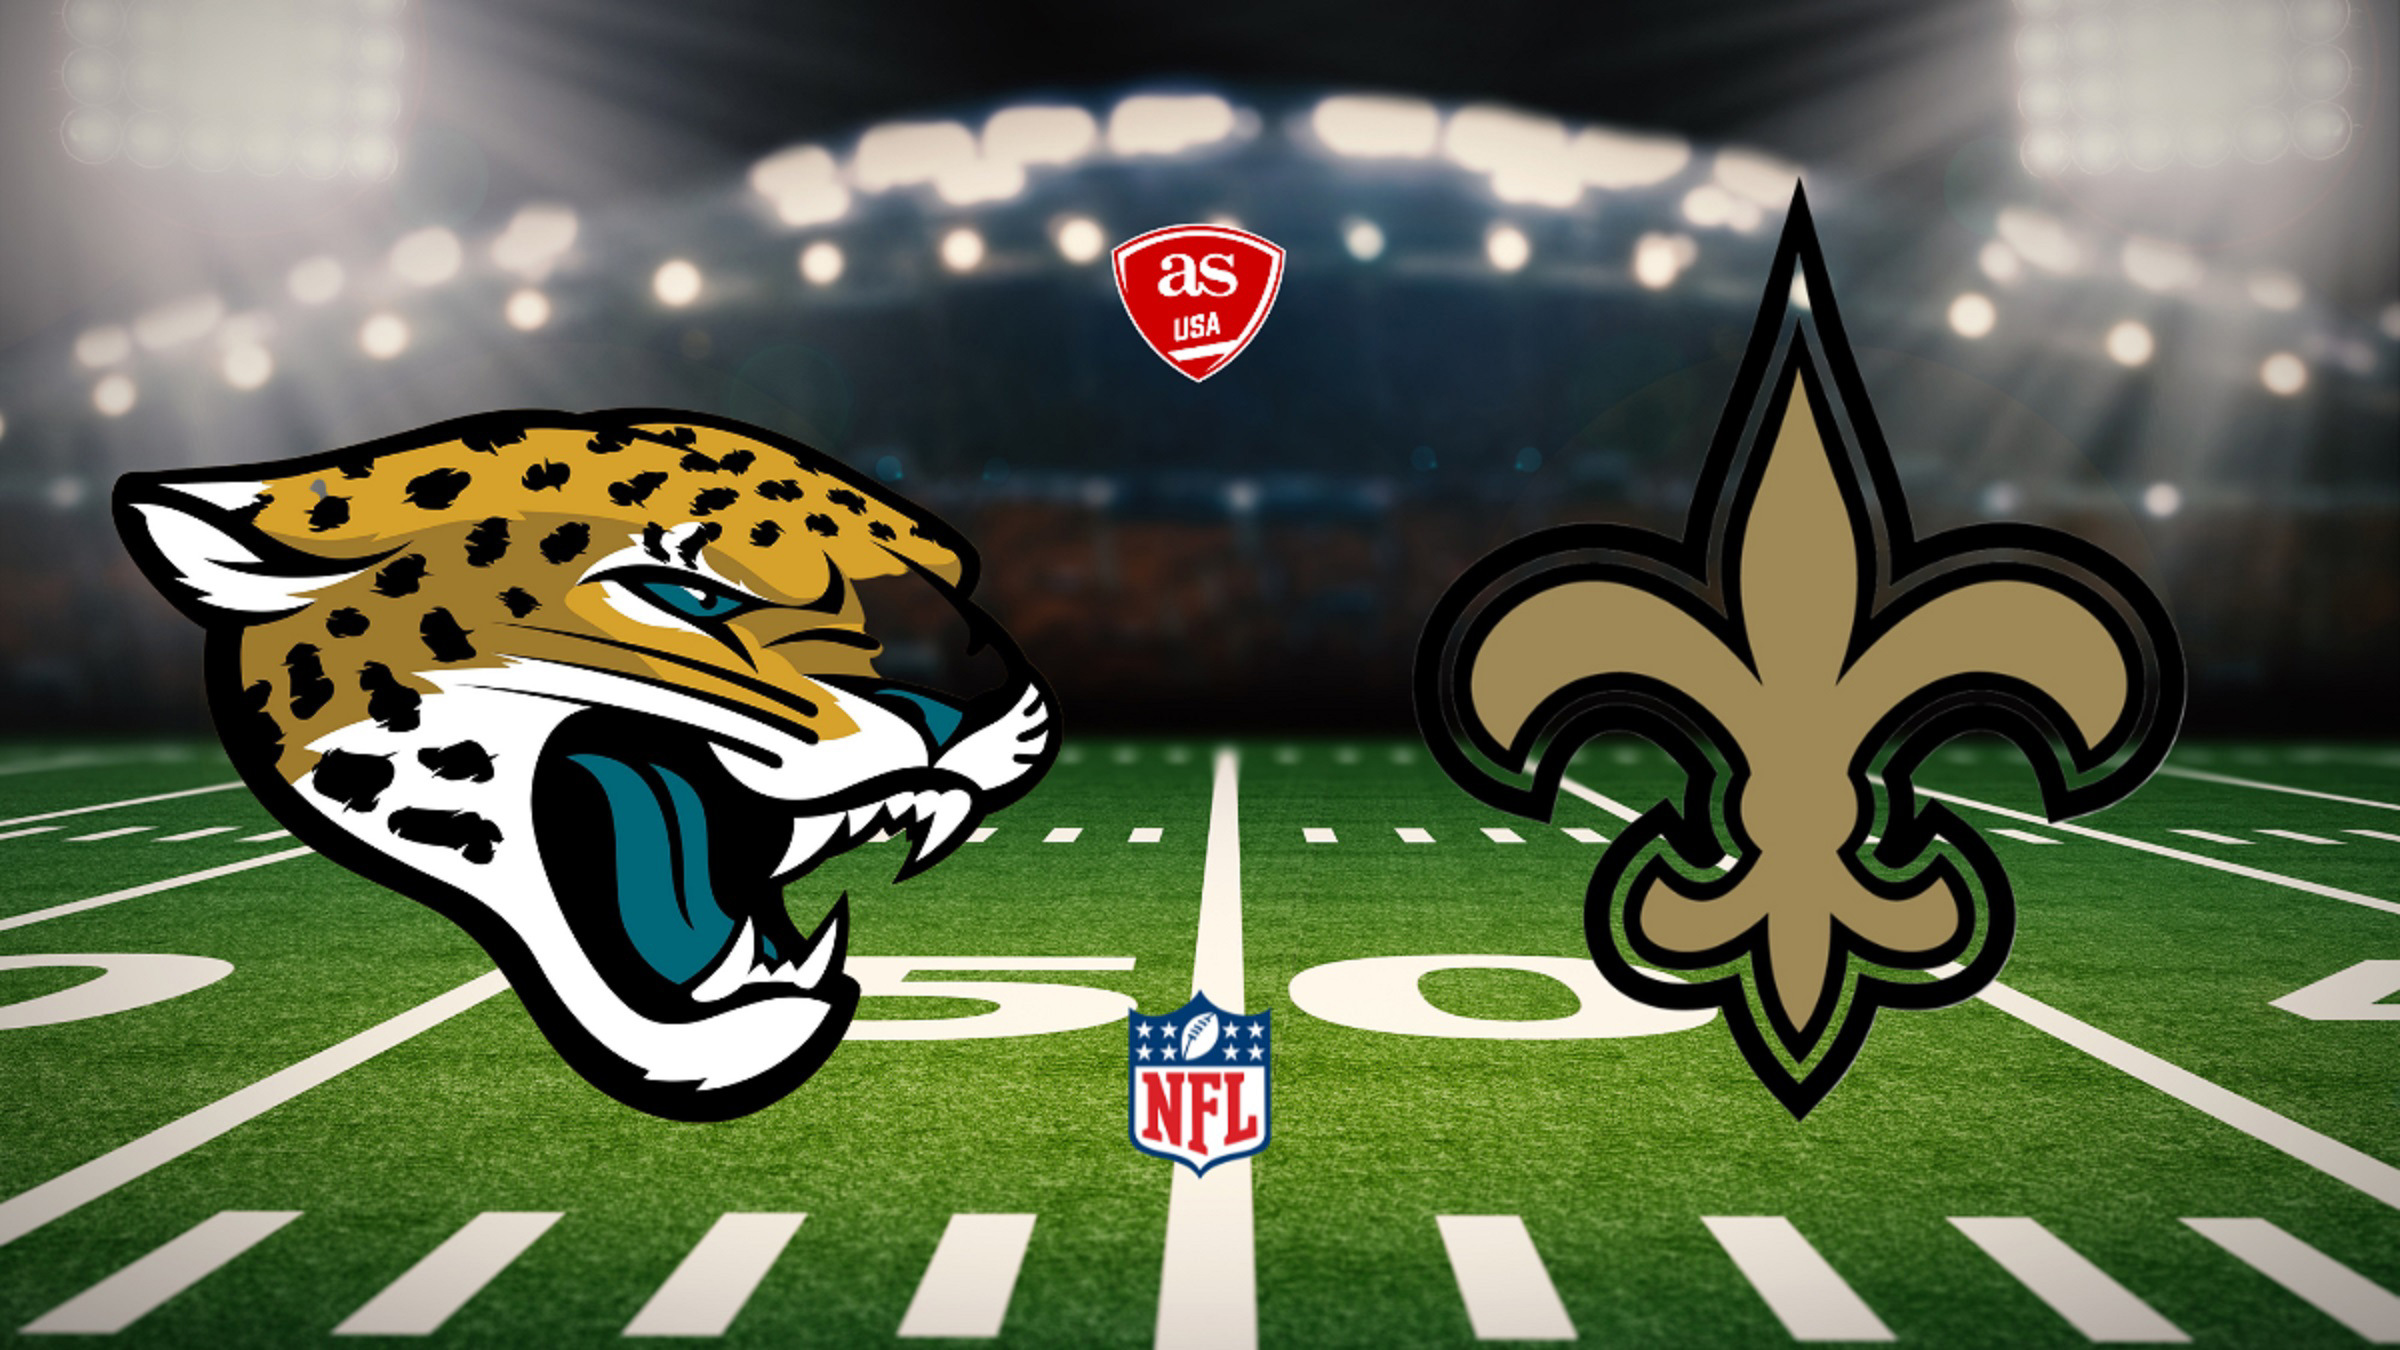 Jacksonville Jaguars vs New Orleans Saints times, how to watch on TV